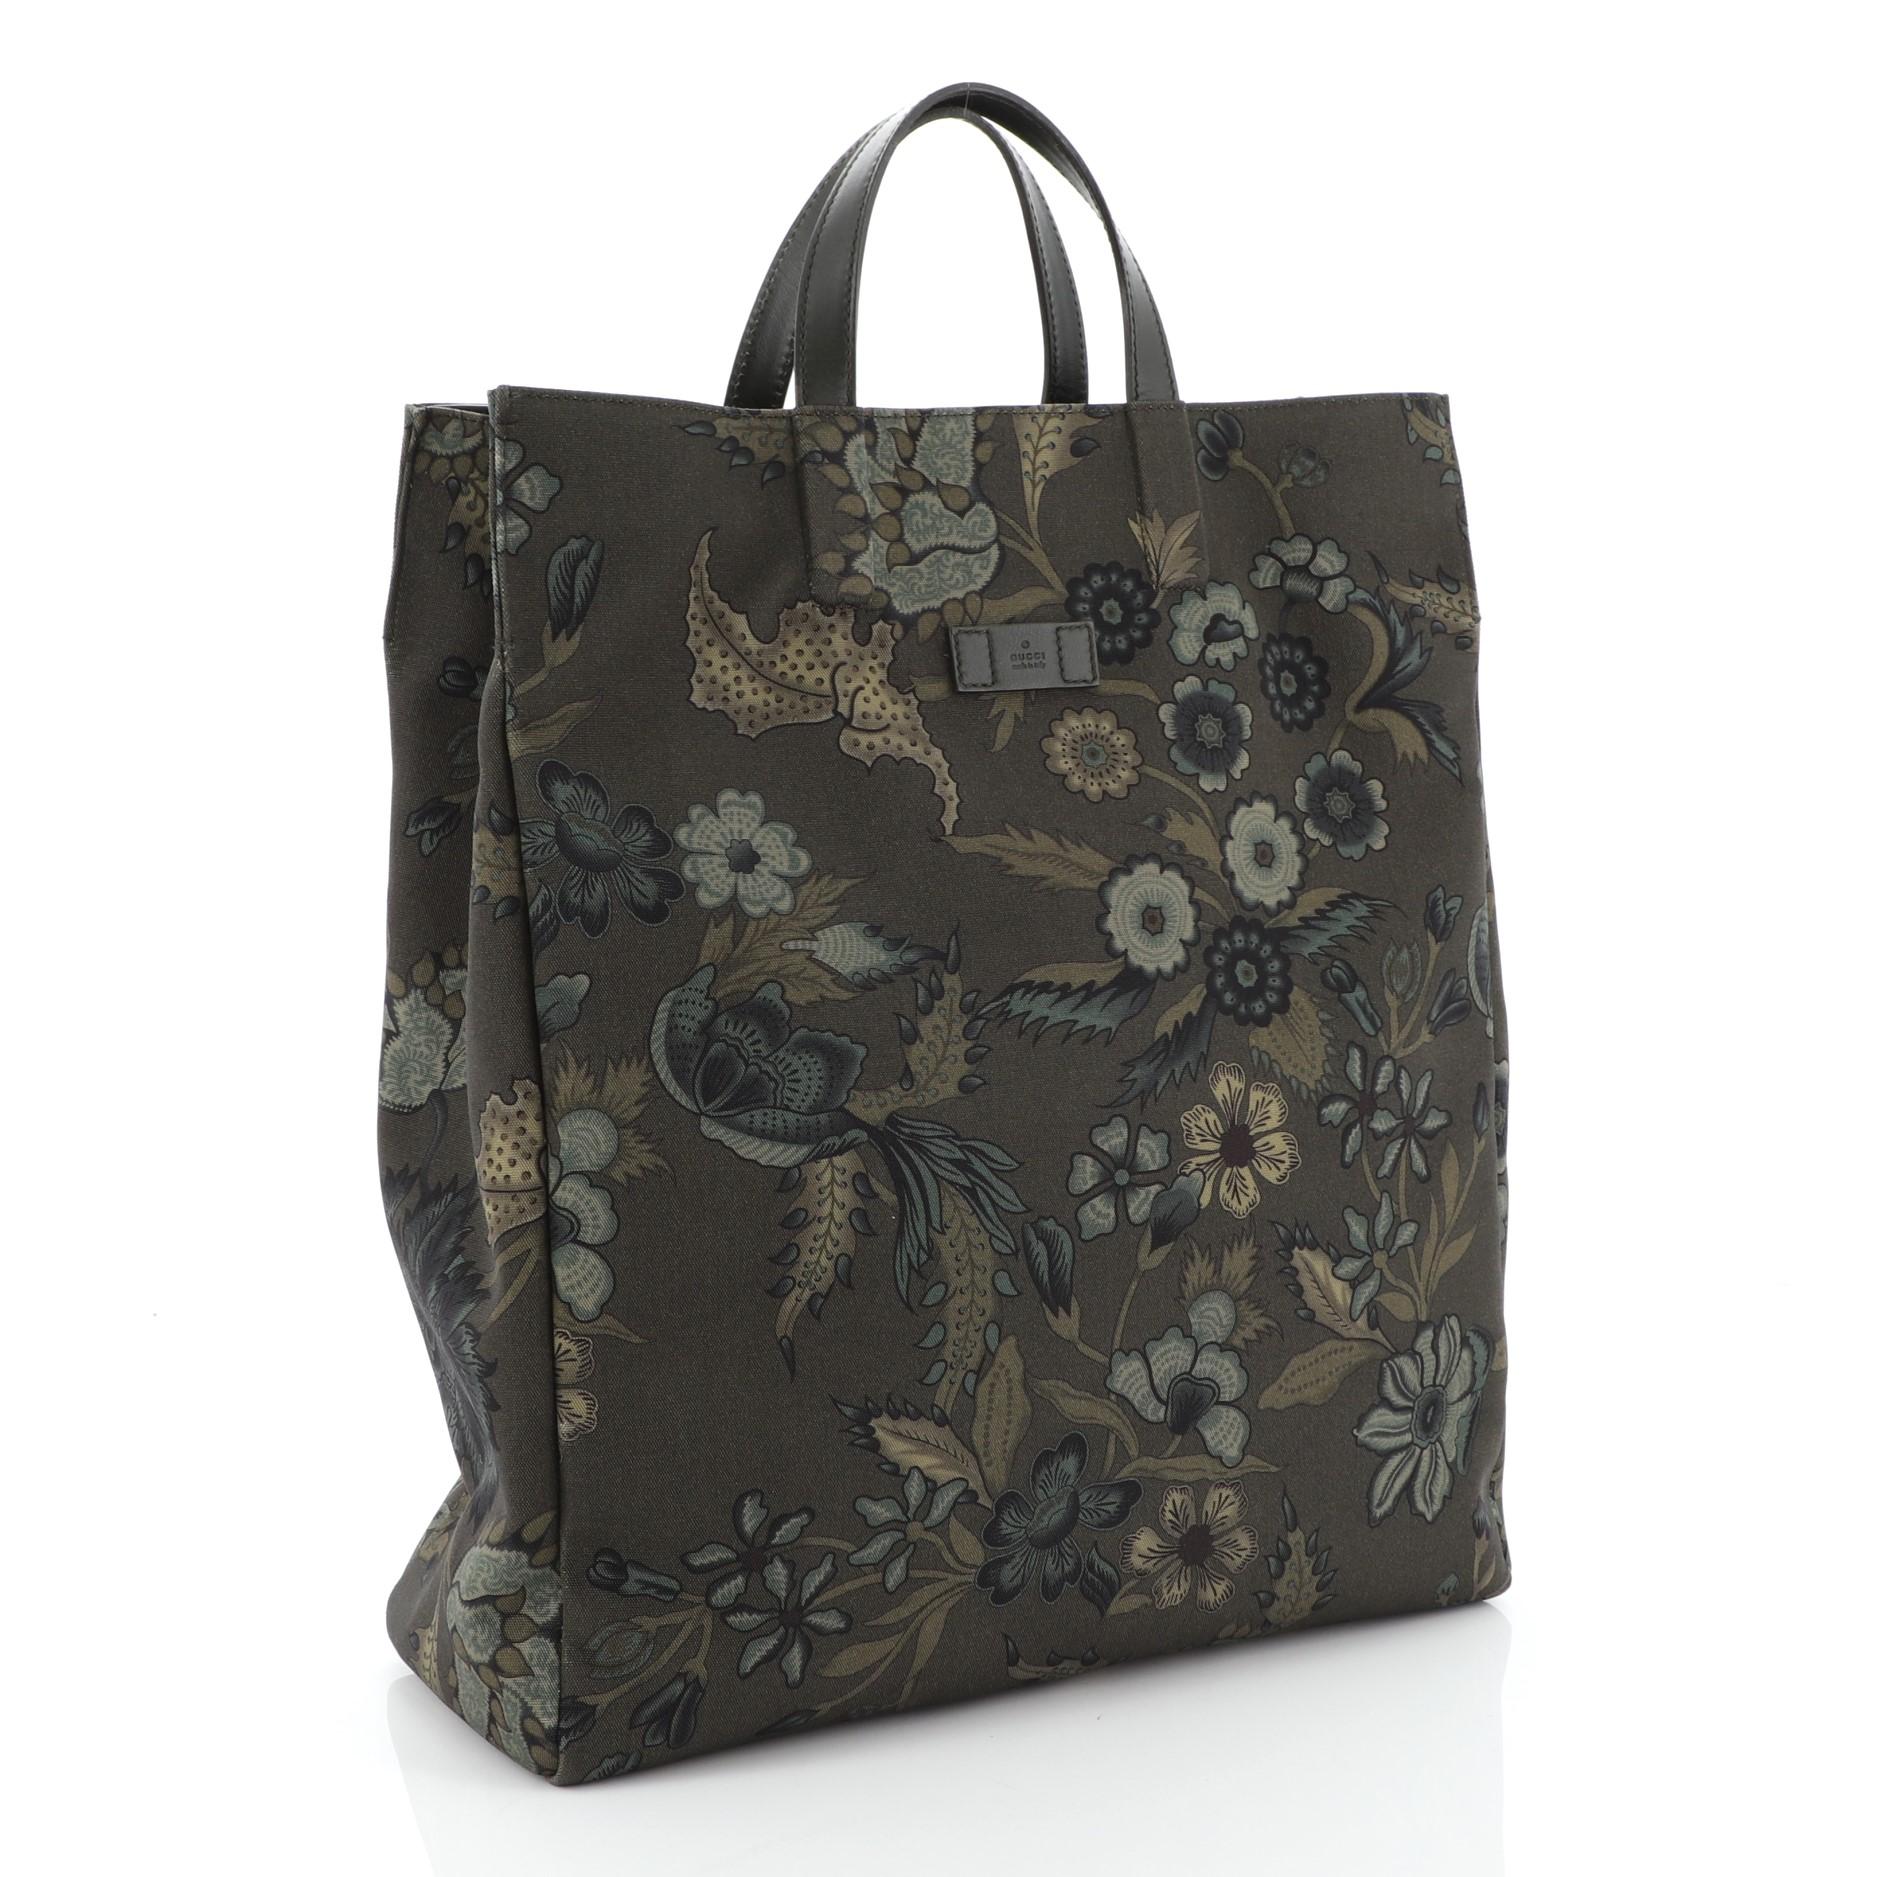 This Gucci G-Active Knight Tote Flora Canvas Tall, crafted in green flora printed canvas, features dual flat leather handles and silver-tone hardware. Its wide-open top showcases a green nylon interior with zip pocket. 
Estimated Retail Price: